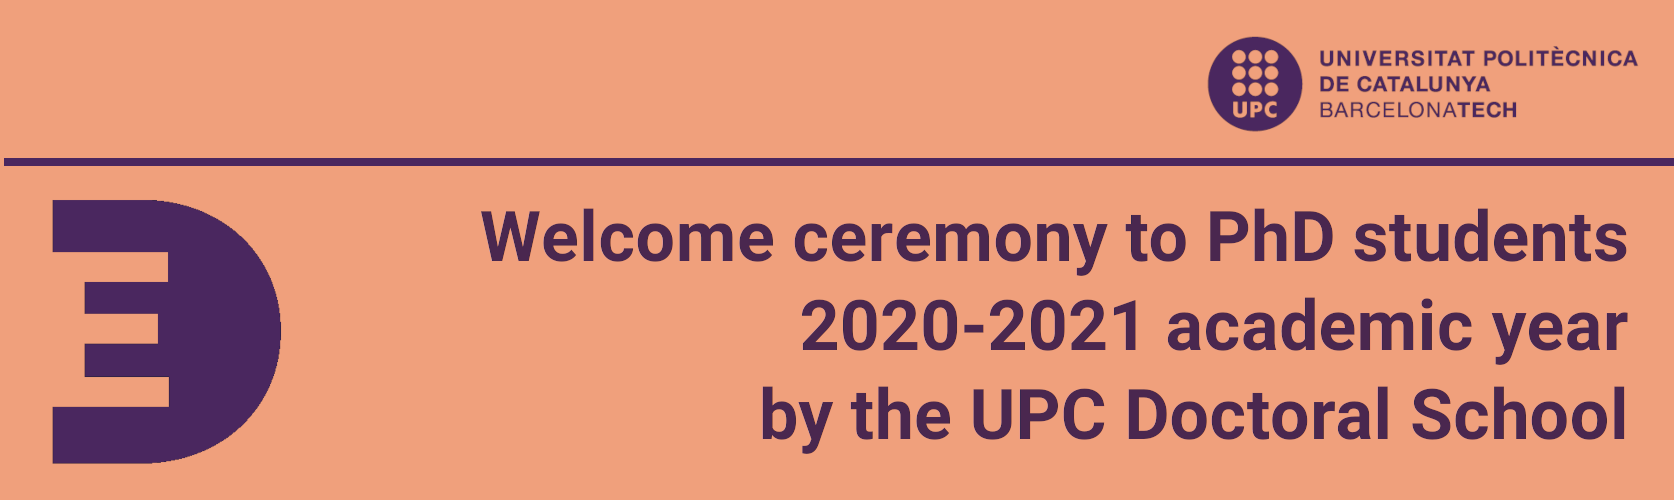 welcome_ceremony6.png